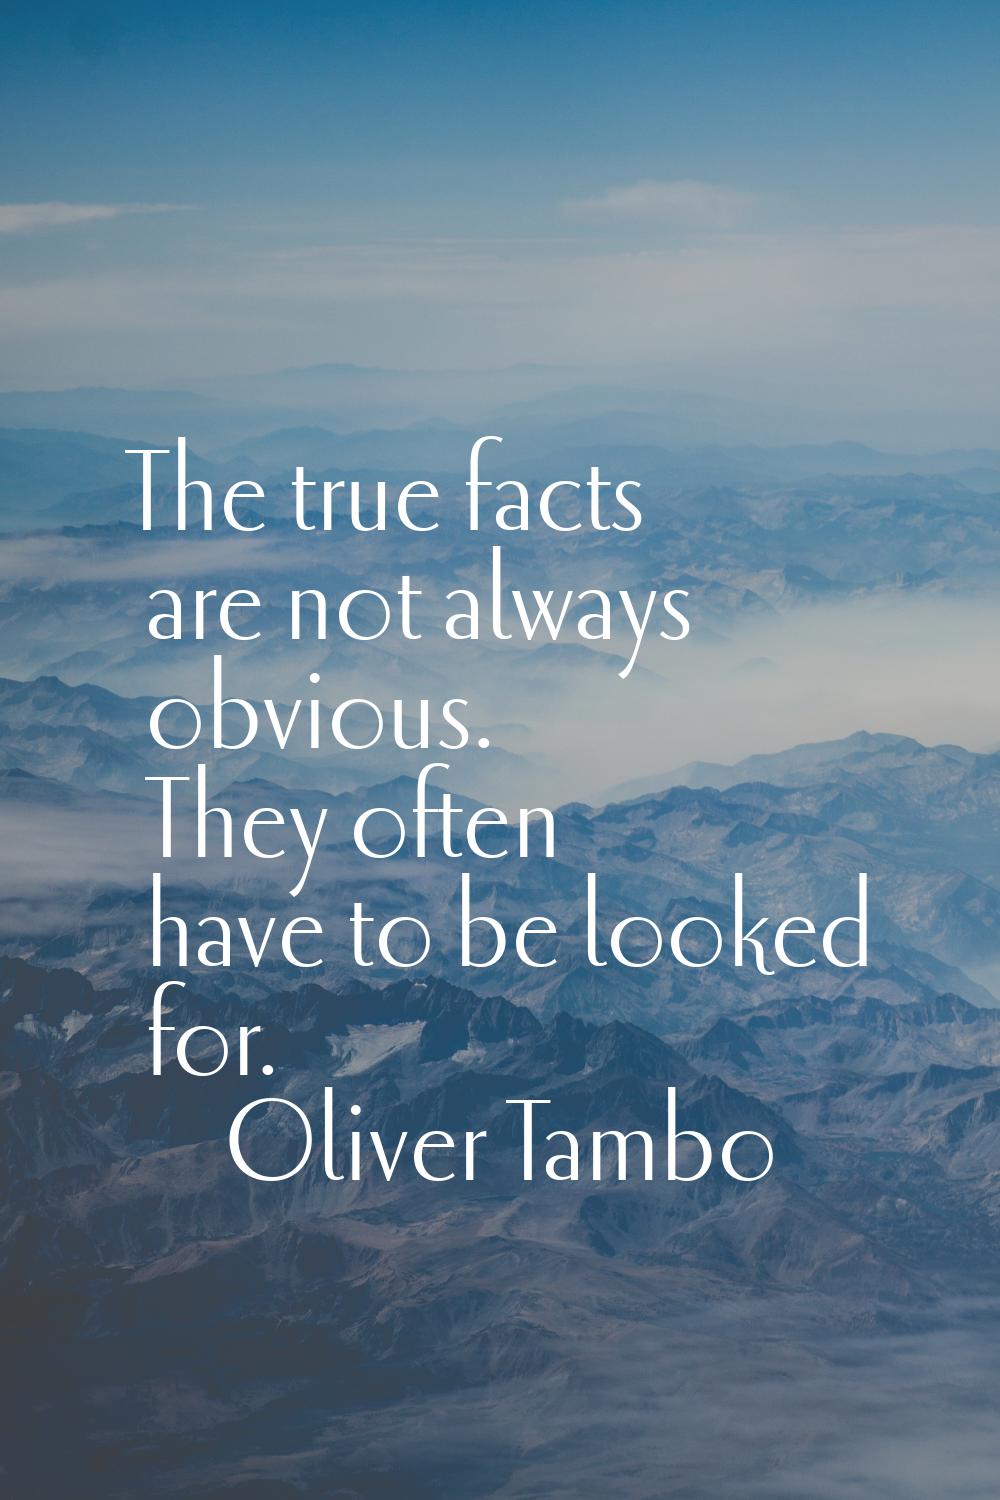 The true facts are not always obvious. They often have to be looked for.